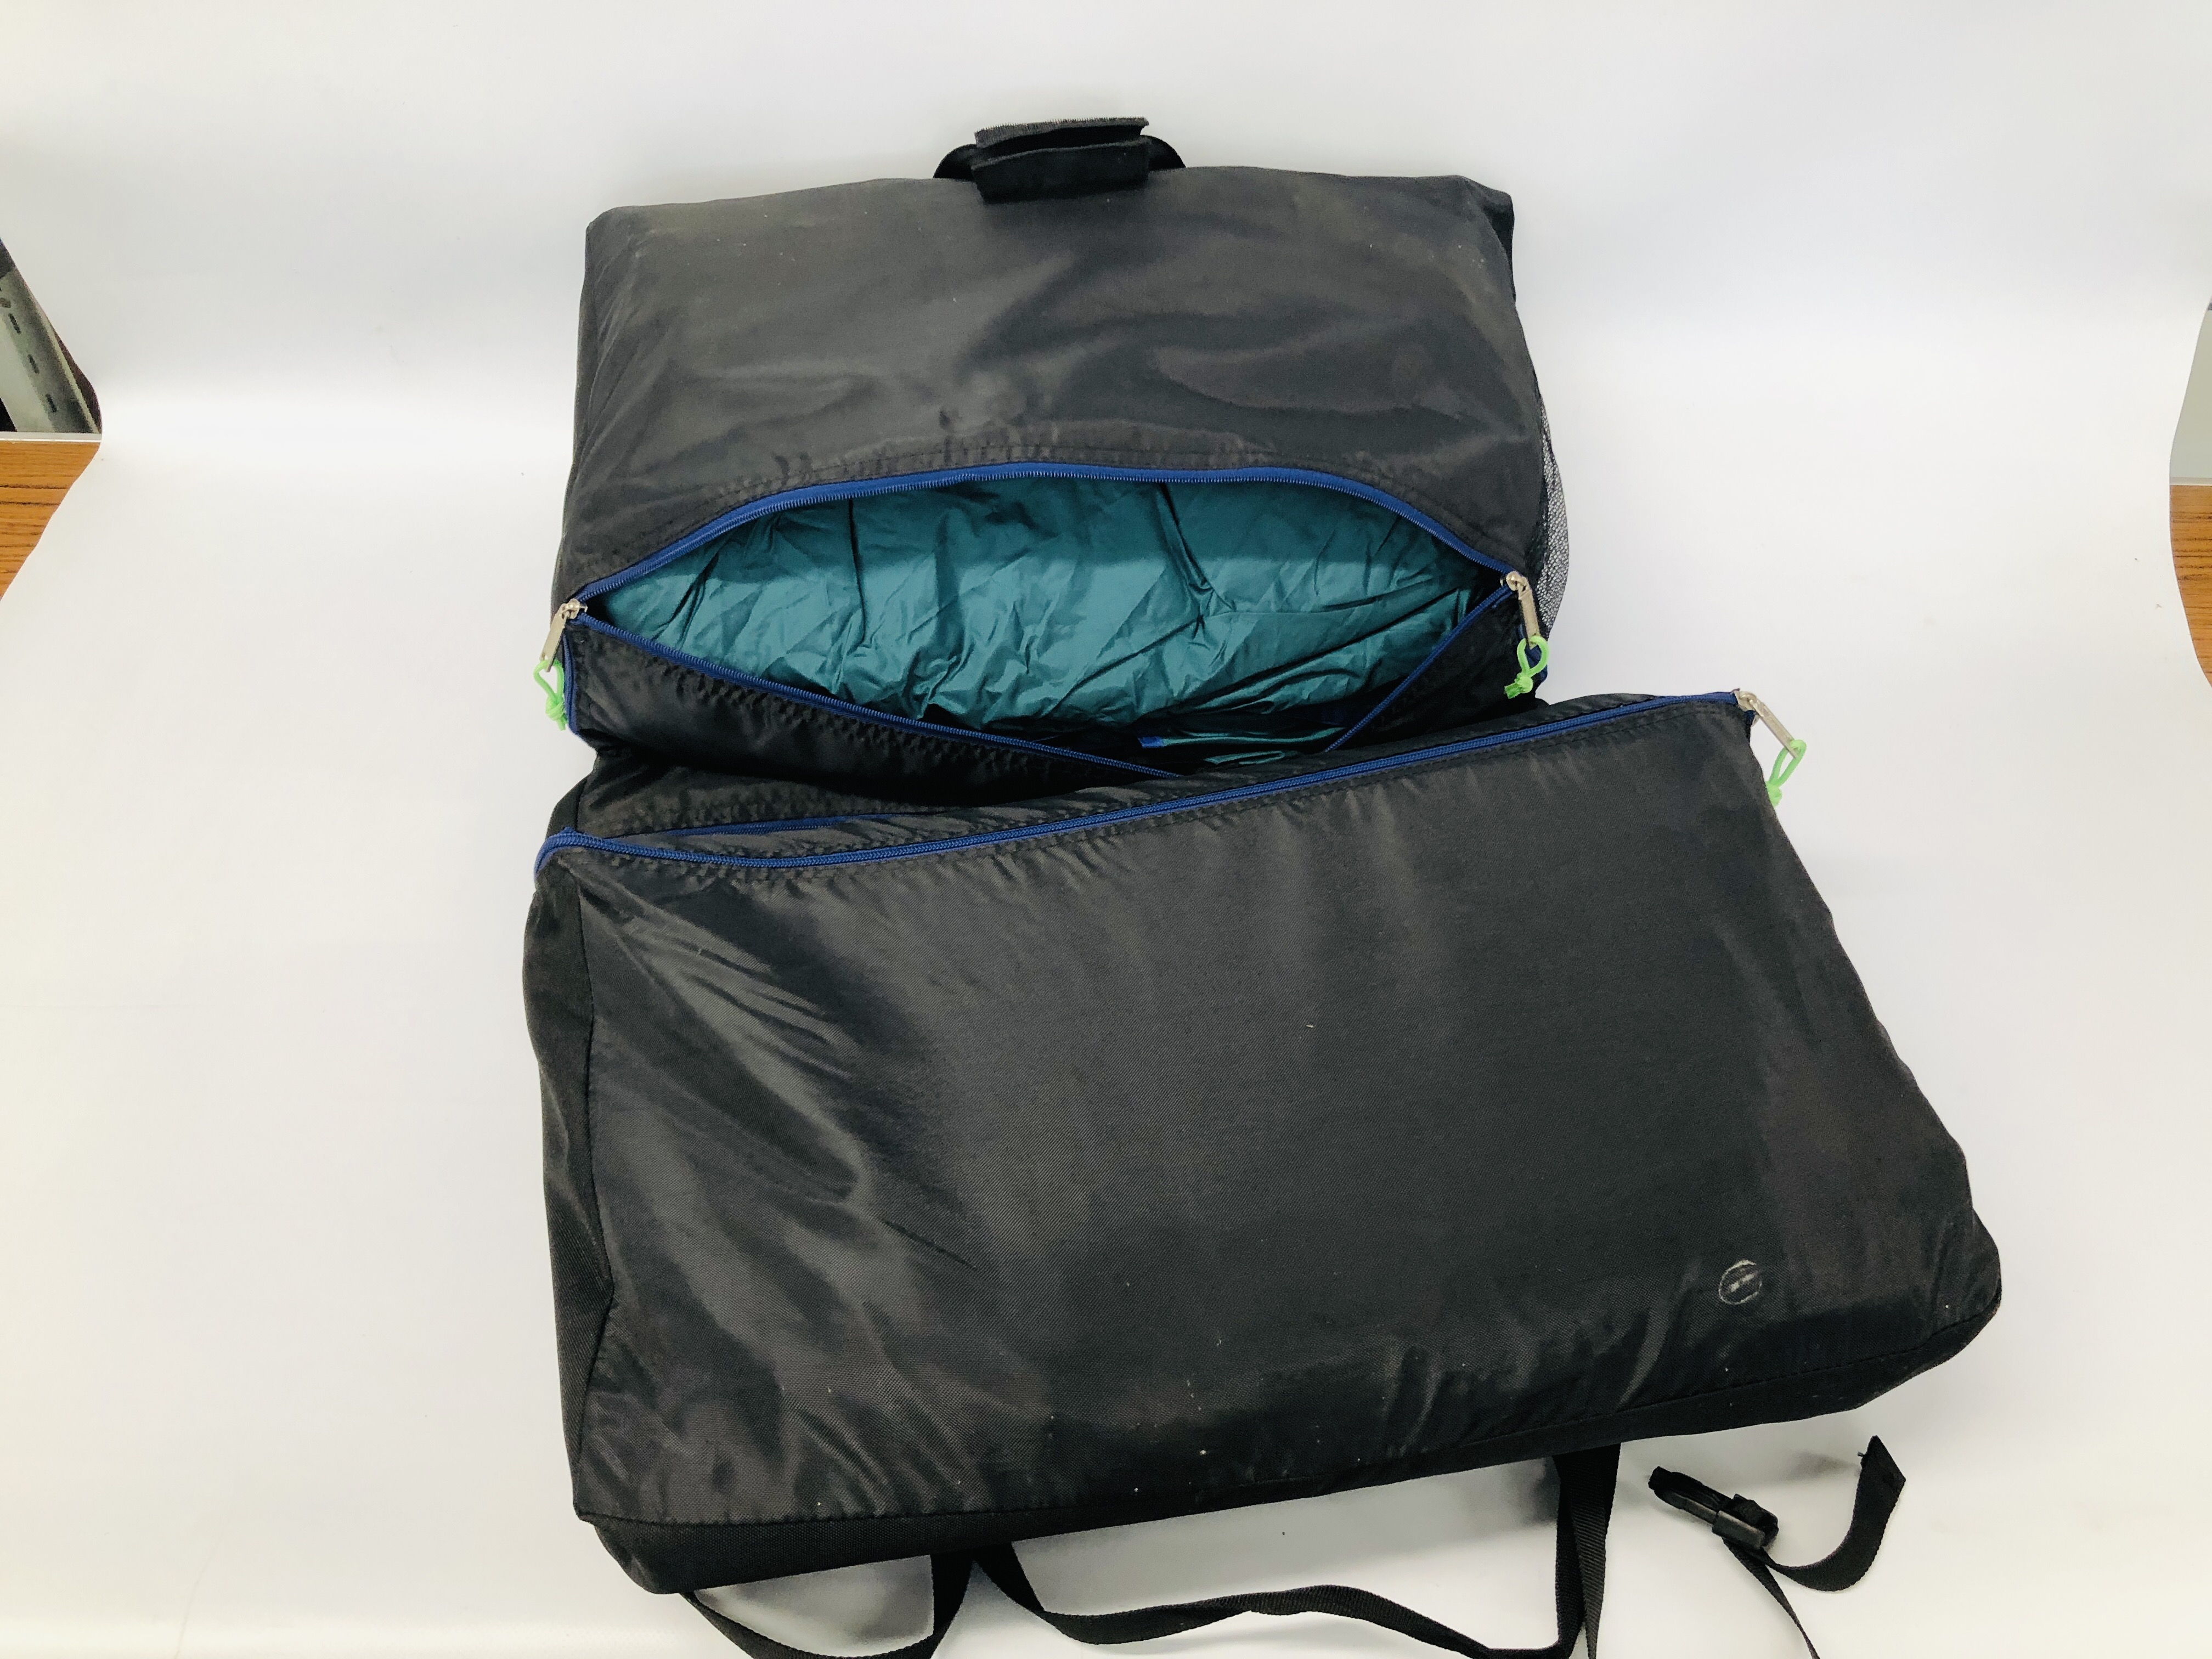 A COLMAN BIOSPACE 400 4 PERSON TENT SEPARATE SLEEPING COMPARTMENTS BUILT IN GROUNDSHEET - NEW AND - Image 2 of 5